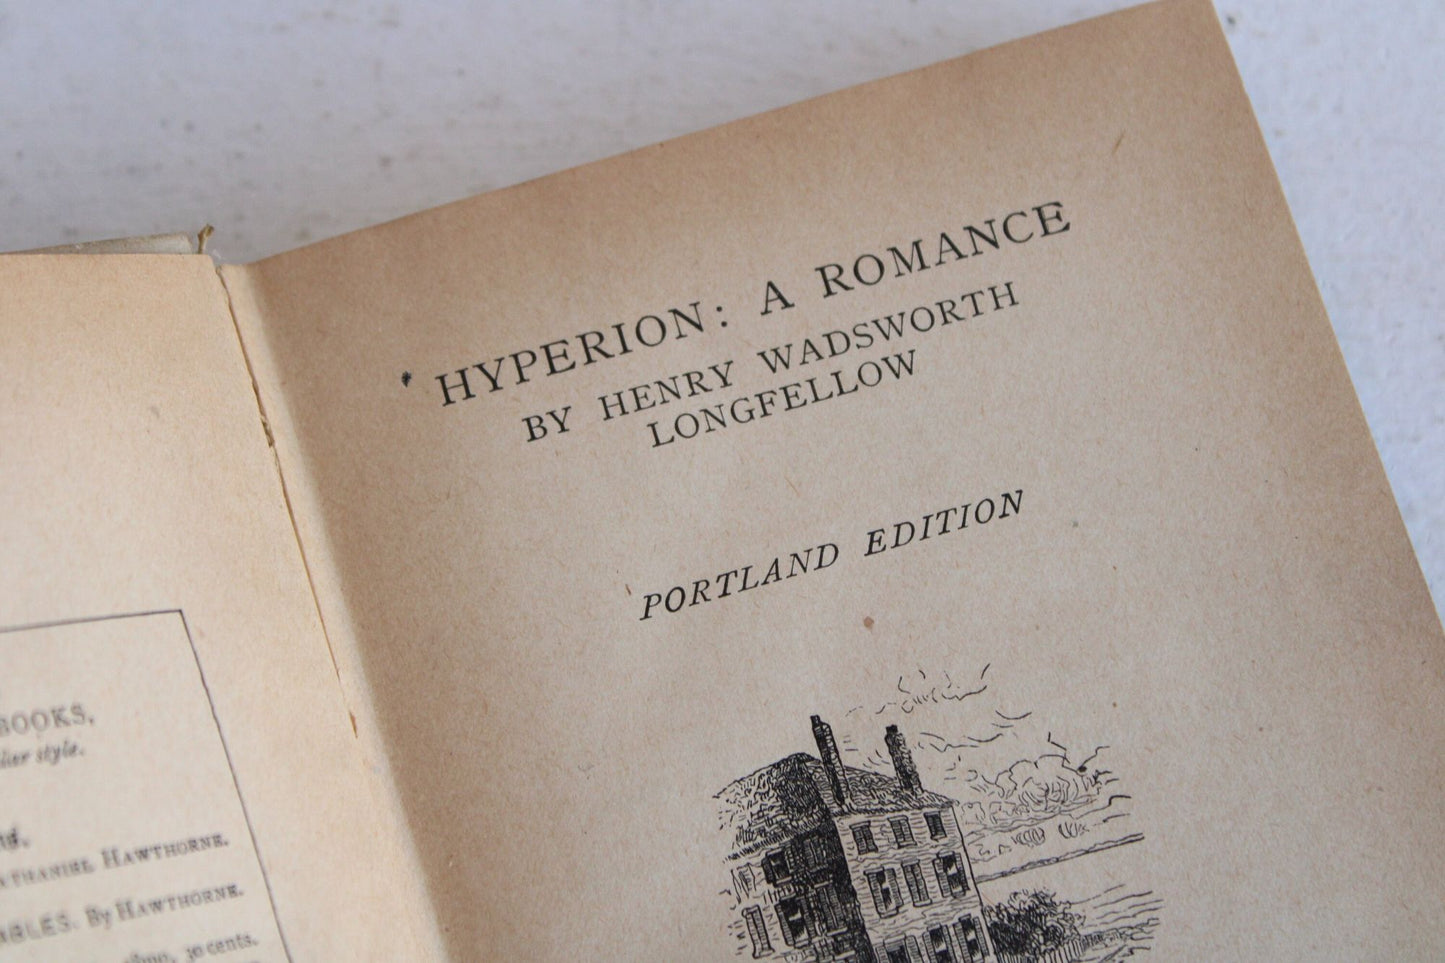 Vintage 1890s Book, Antique " Hyperion A Romance" Henry Wadsworth Longfellow